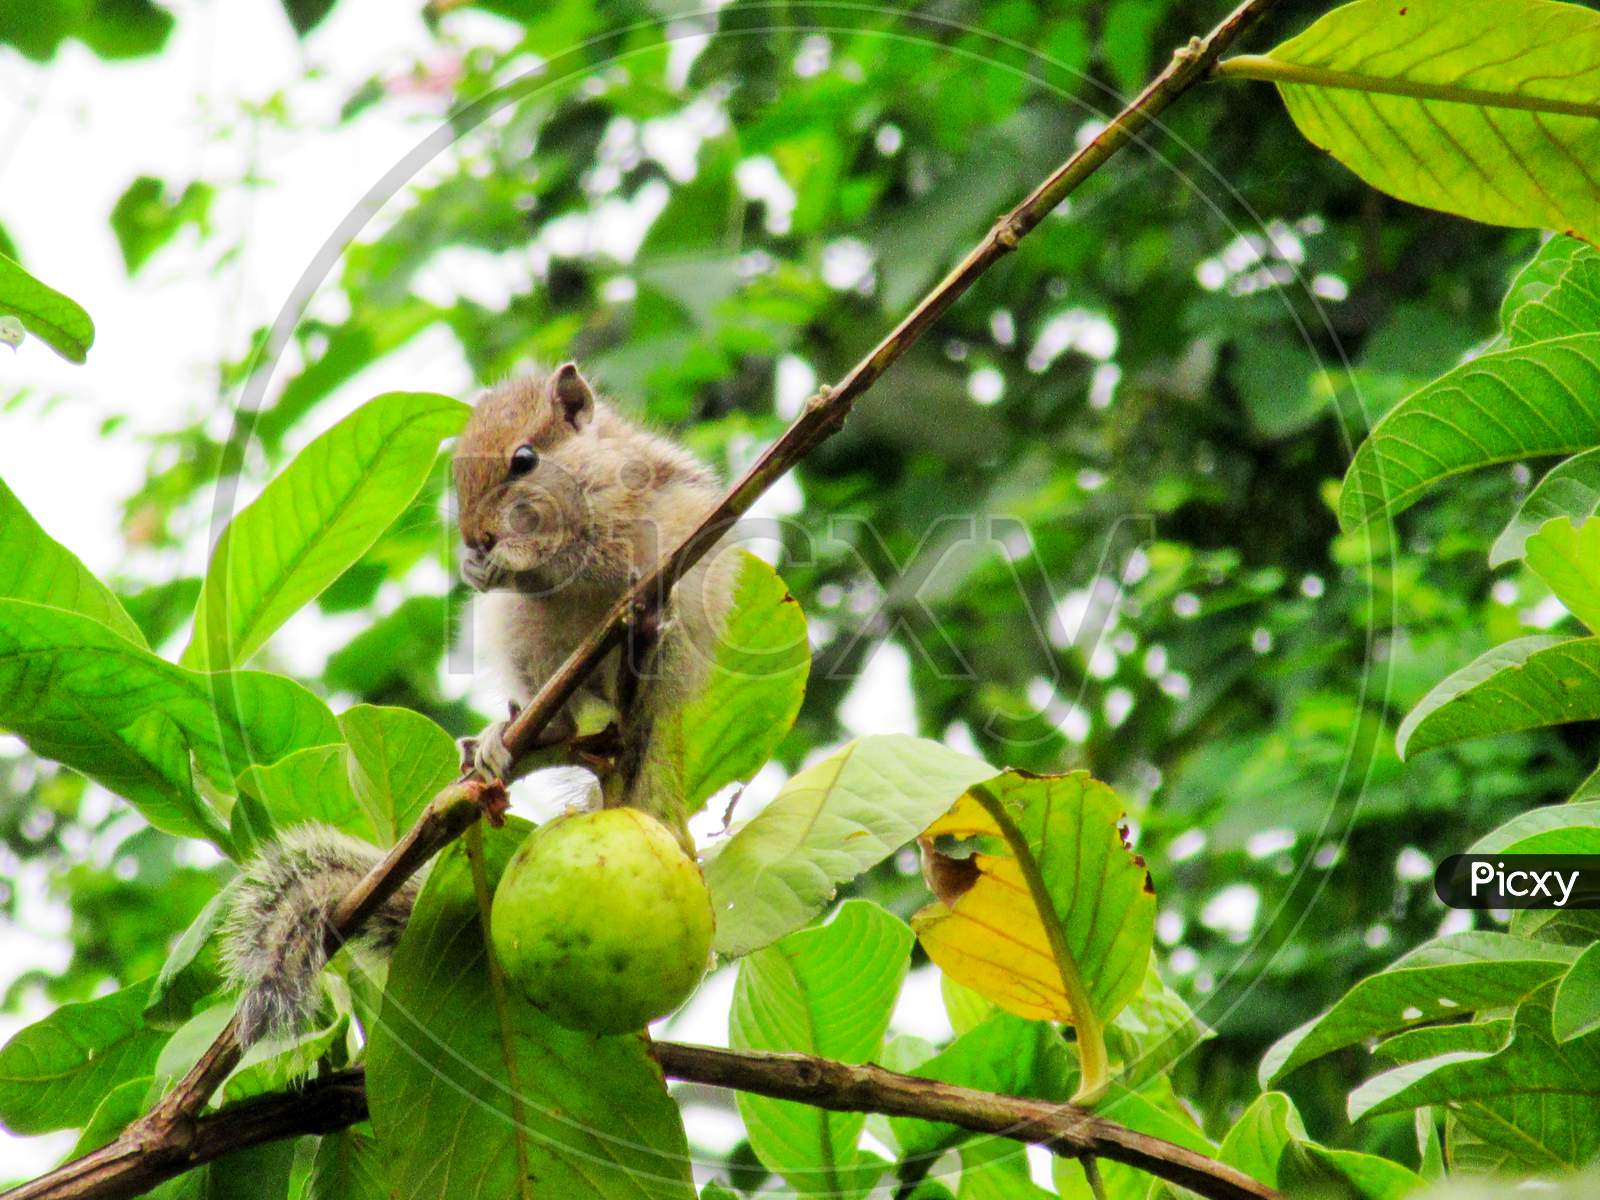 Squirrel eating guava in the tree, closeup shots